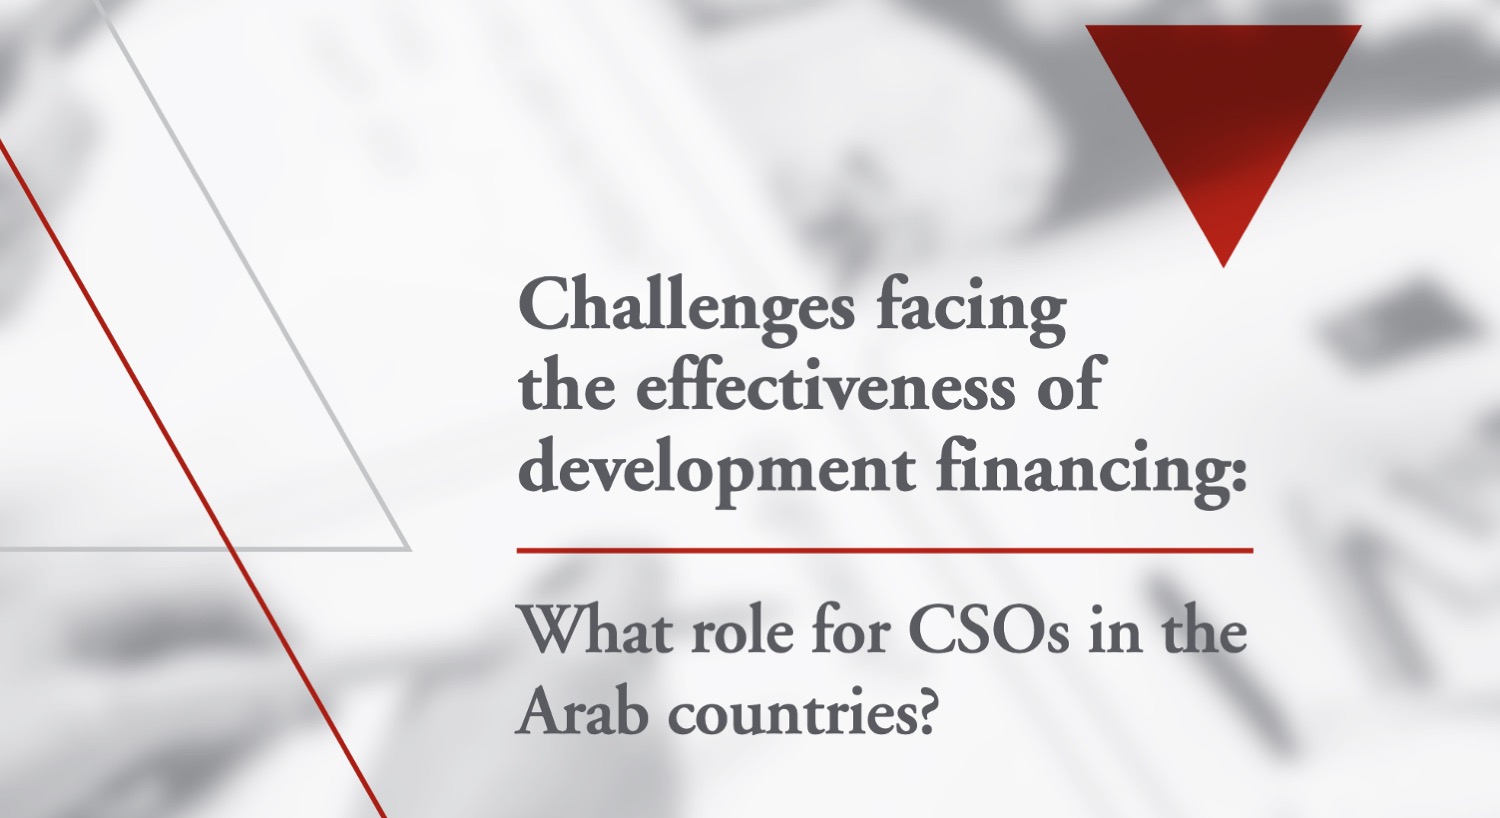 Challenges Facing the Effectiveness of Development Financing: What role for CSOs in the Arab countries?